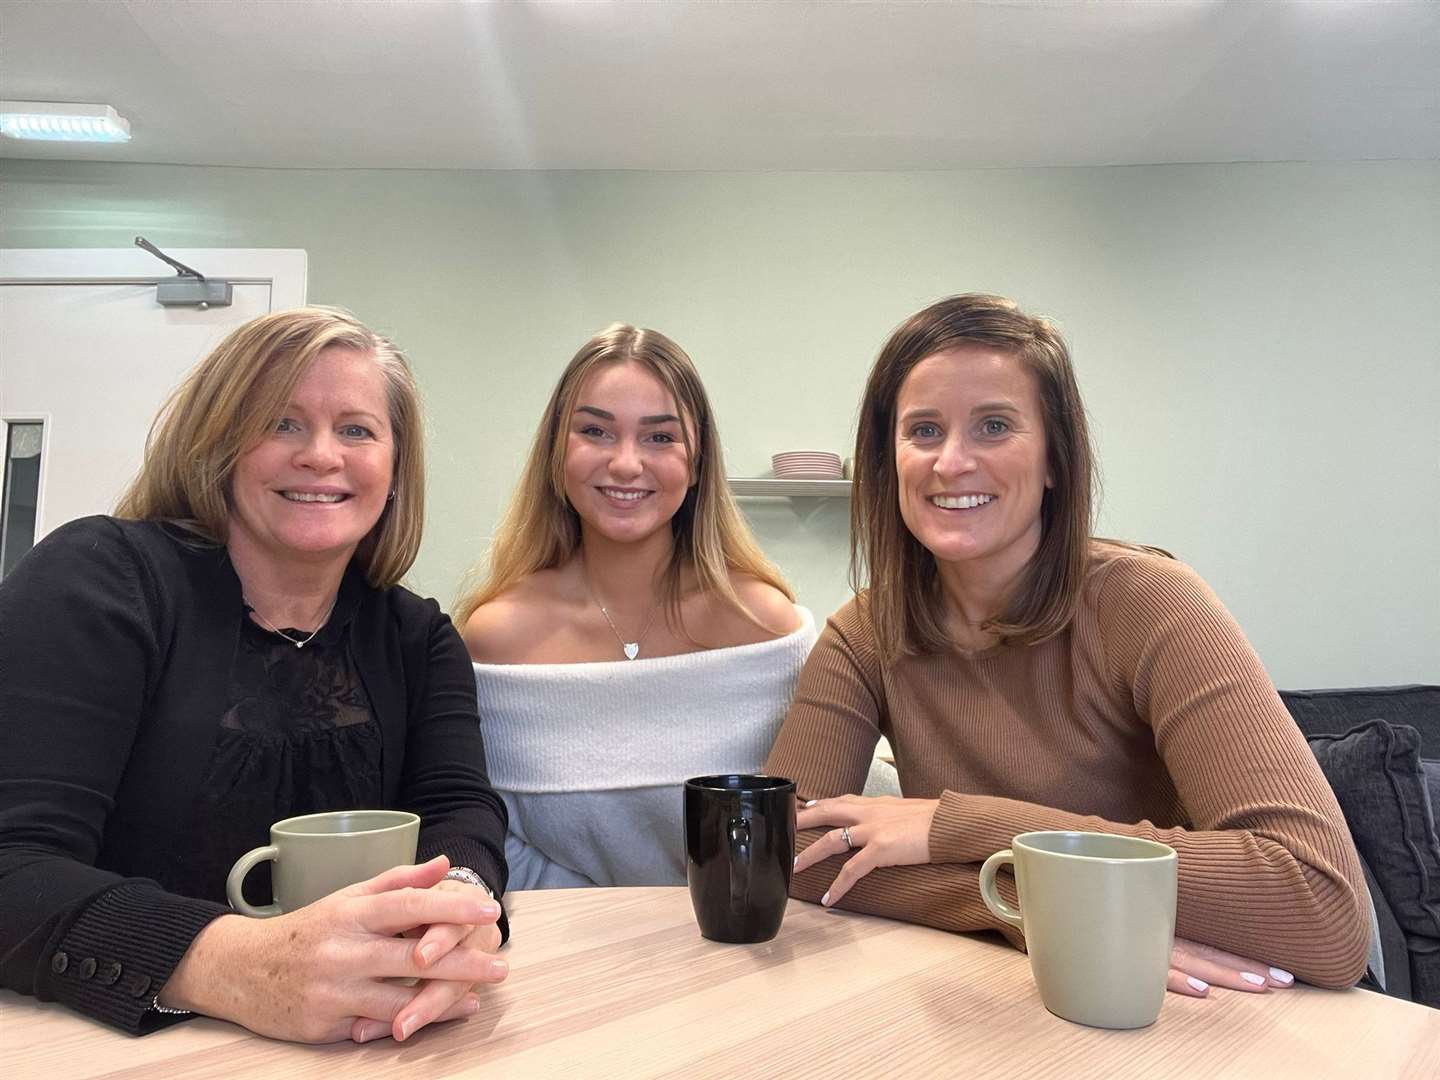 Beth, Annabelle and Emma discussed all things menopause